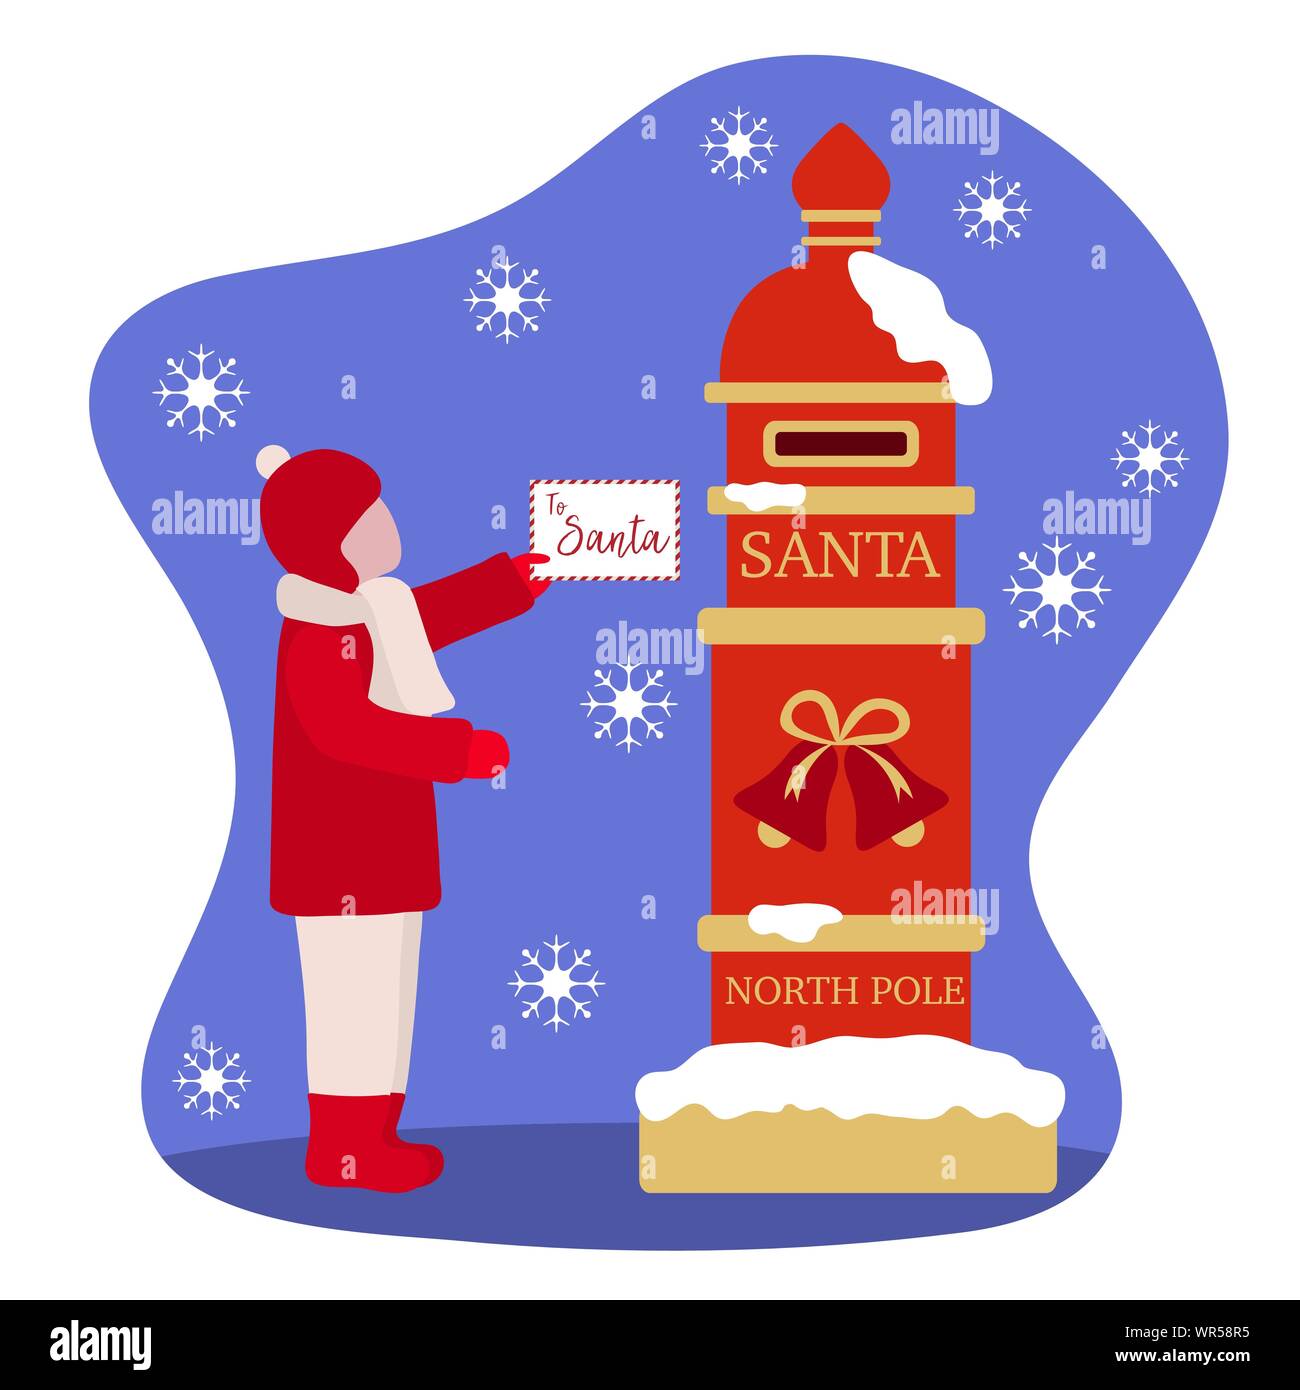 Premium Vector  Santa's mailbox for letters with wishes vector